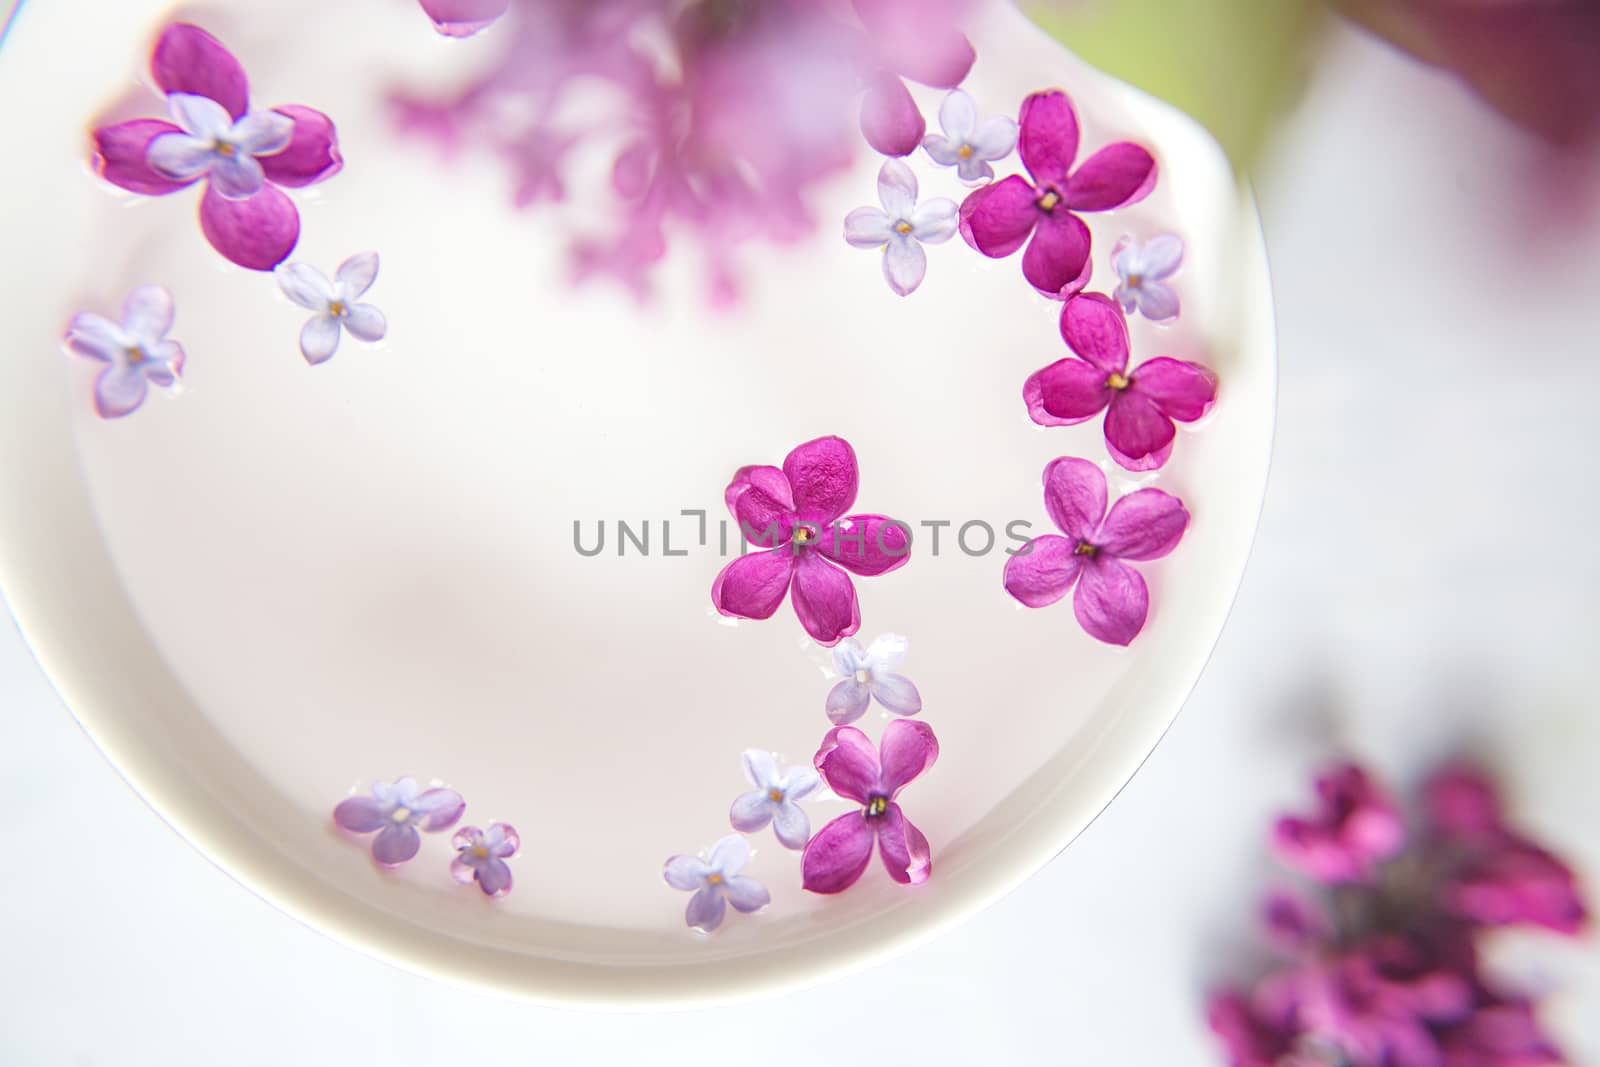 Five-pointed lilac flower among lilac flowers in a cup with water. Spa ritual. Lilac branch with a flower with 5 petals.